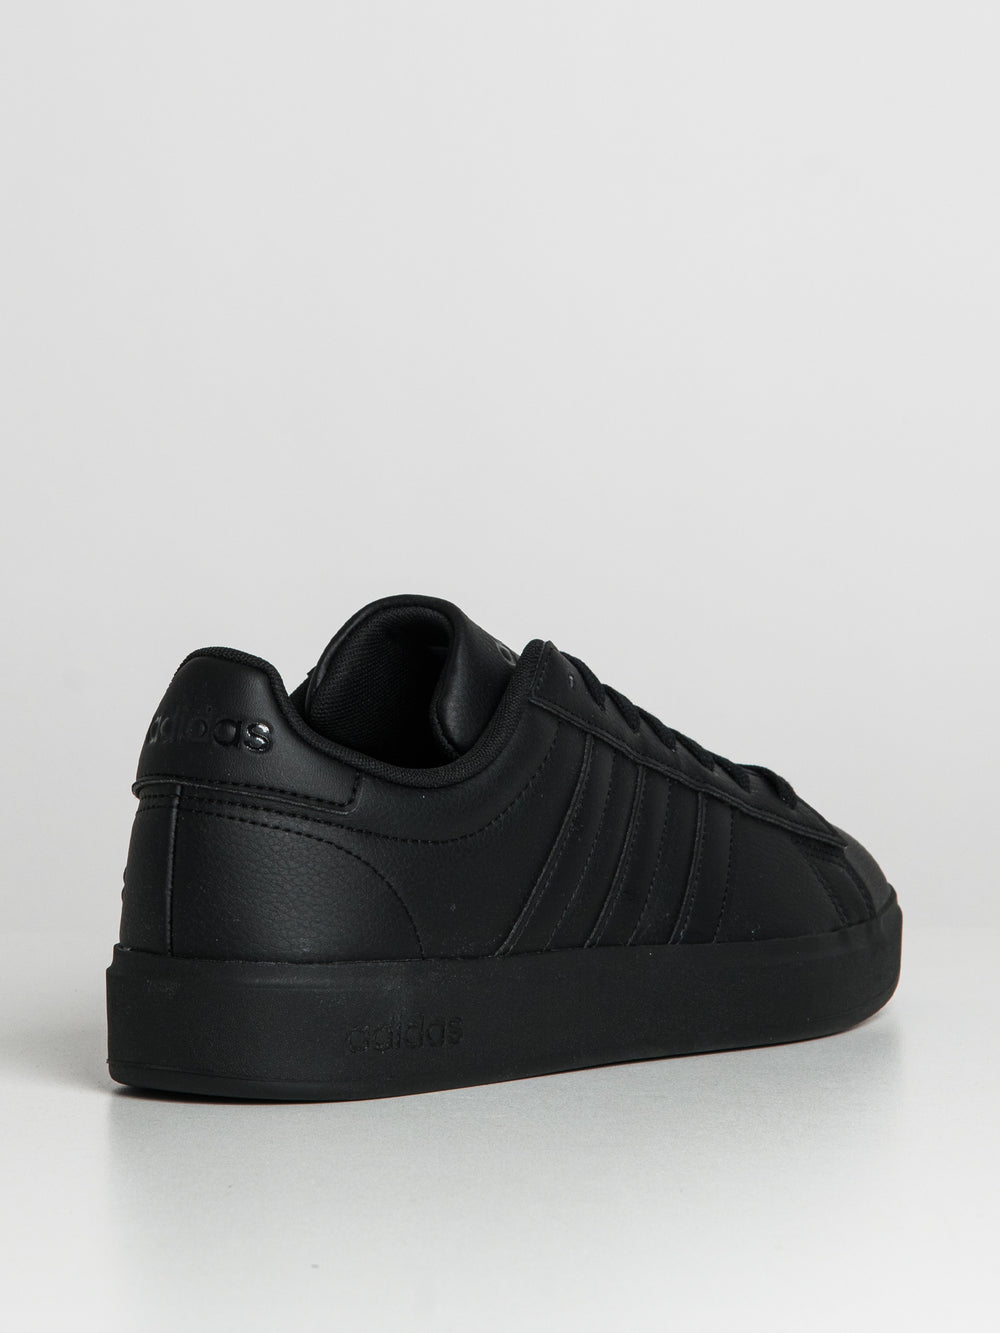 MENS ADIDAS GRAND COURT 2.0 SNEAKER - CLEARANCE